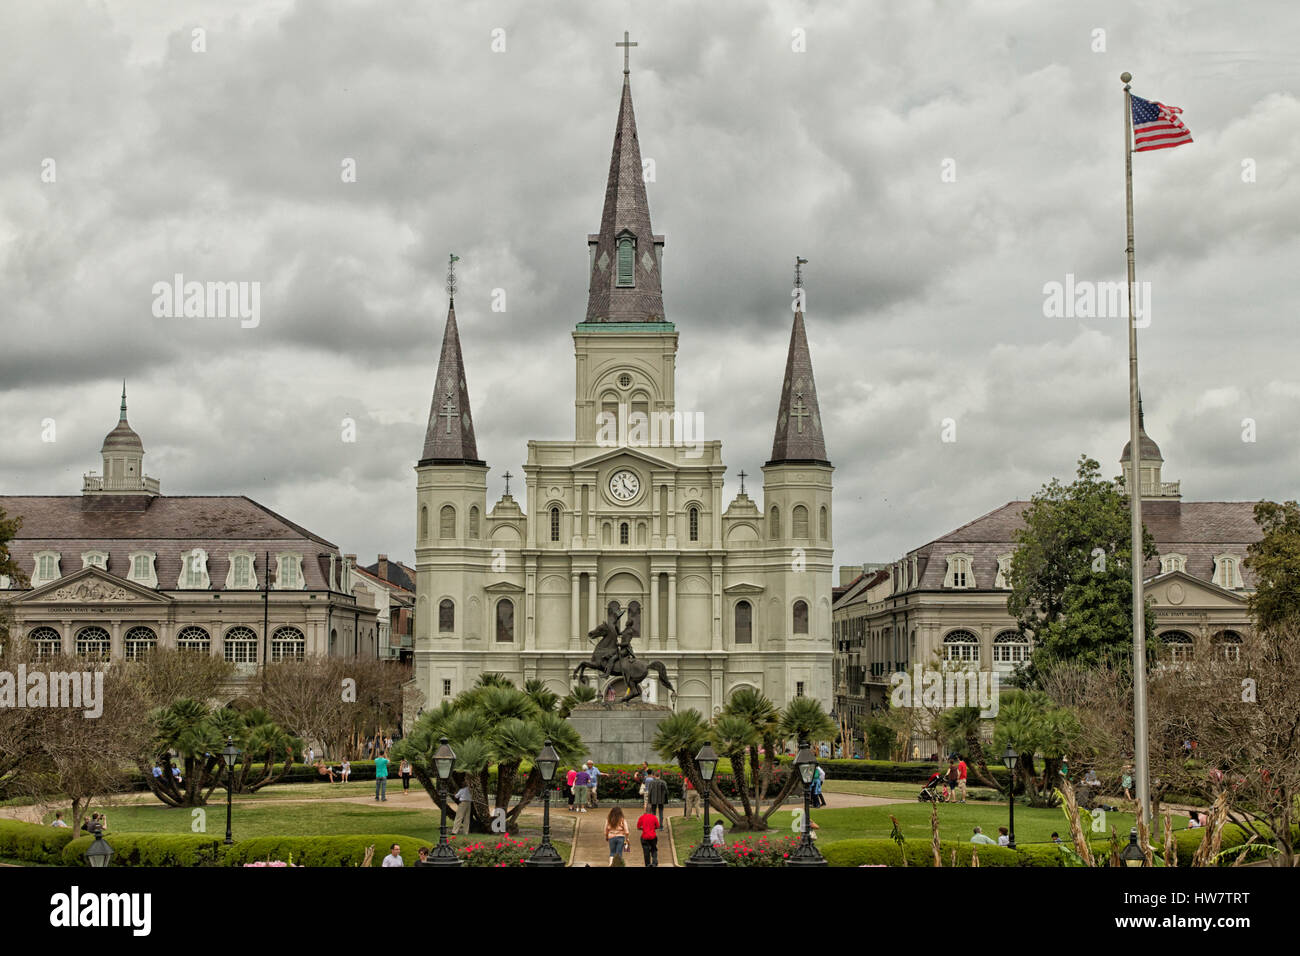 NEW ORLEANS, LOUISIANA - 3. April 2014: St. Louis Cathedral und Jackson Square. Stockfoto